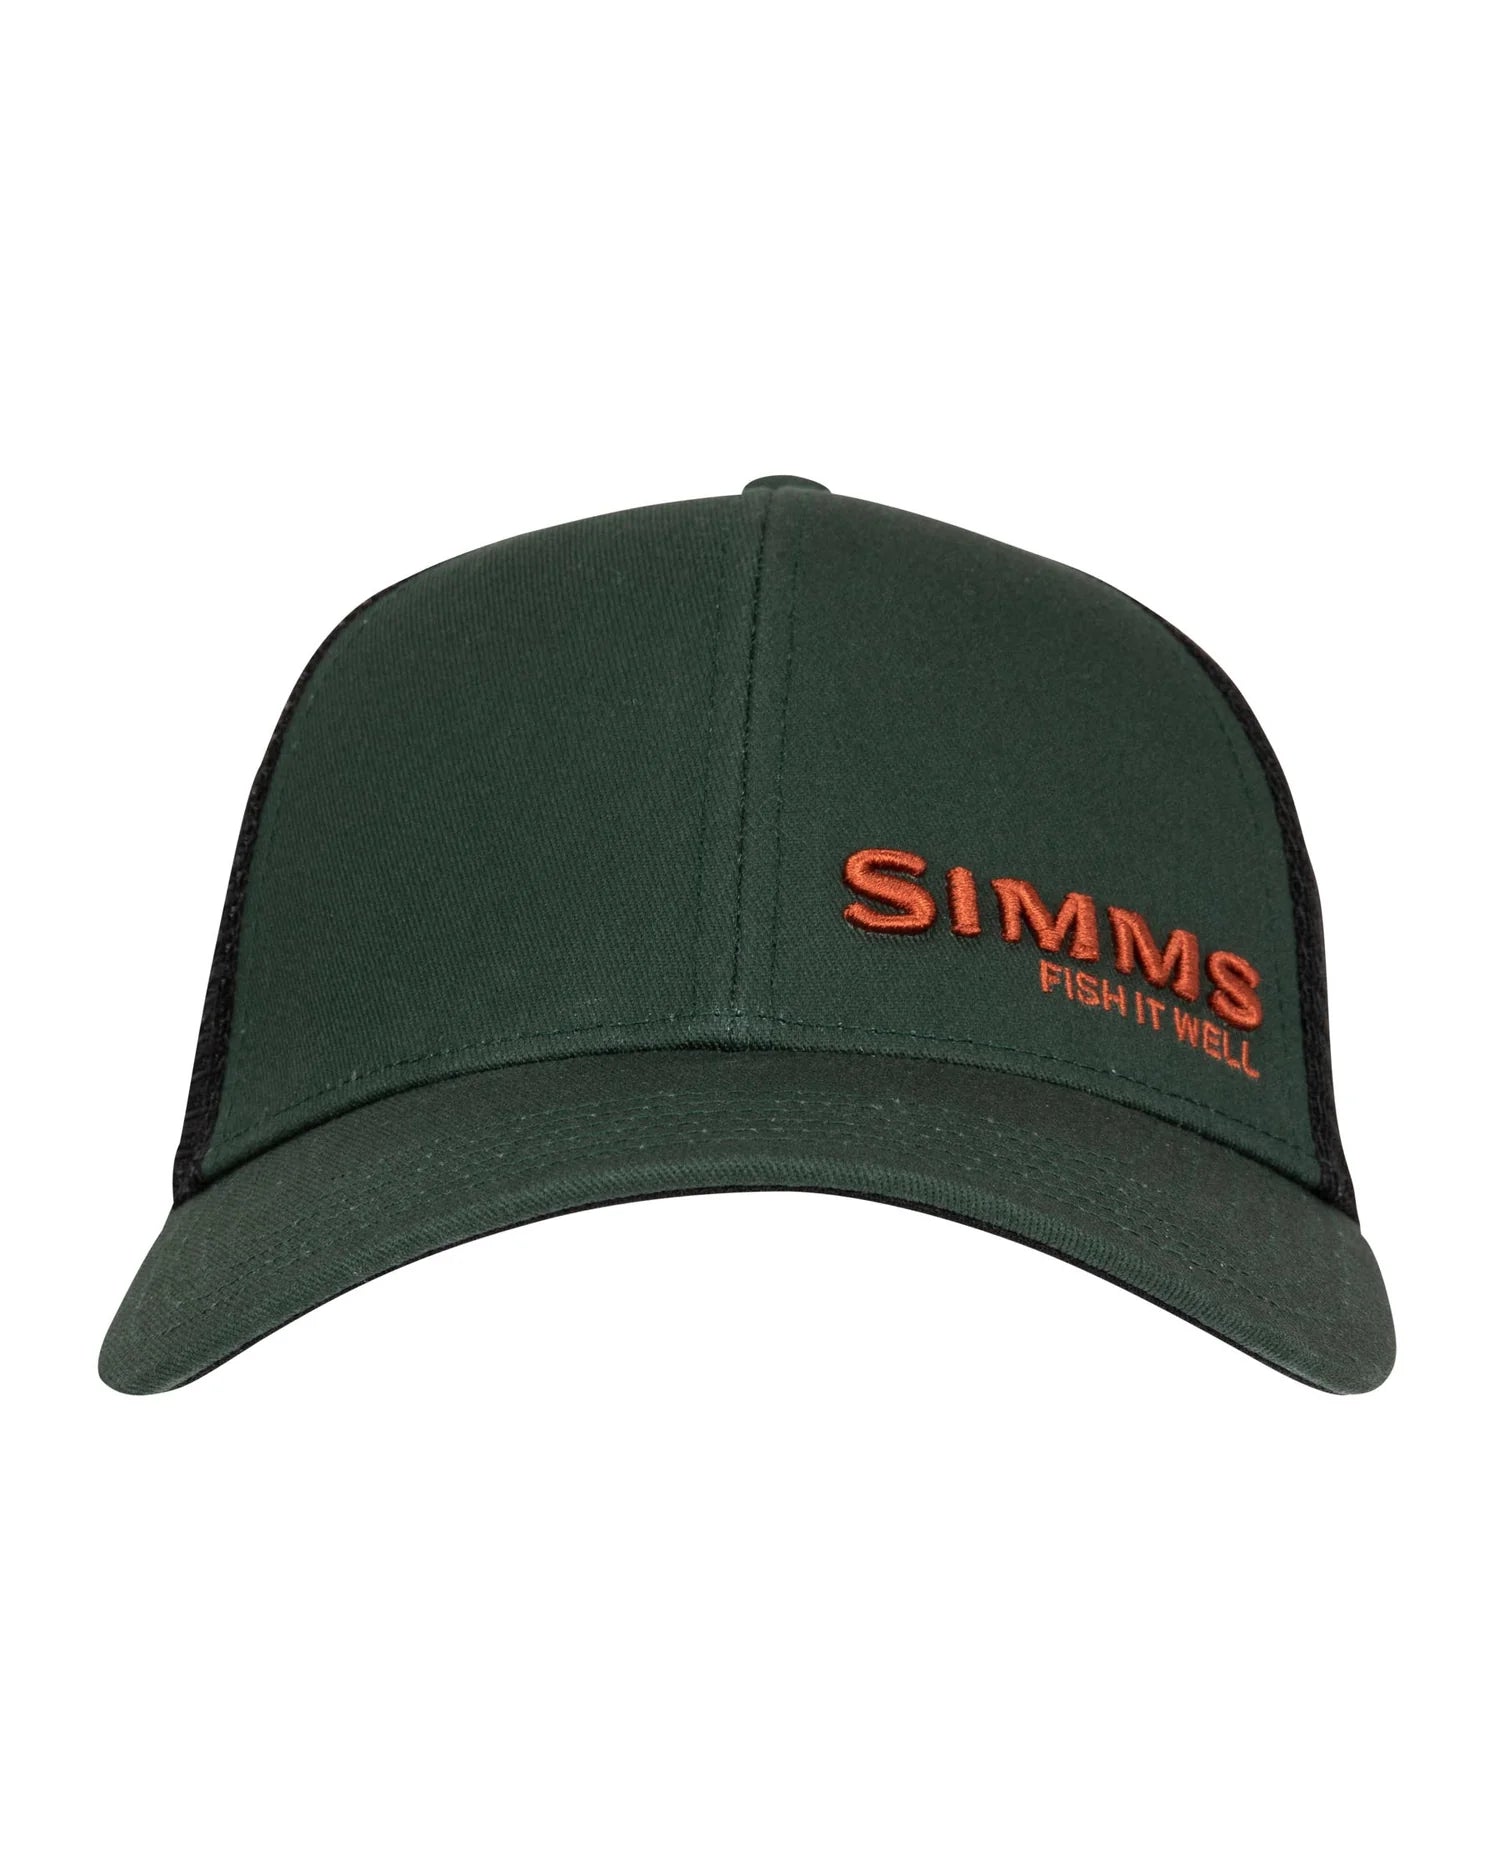 Simms Fish It Well Fishing Trucker Hat Cap - Color Admiral Blue